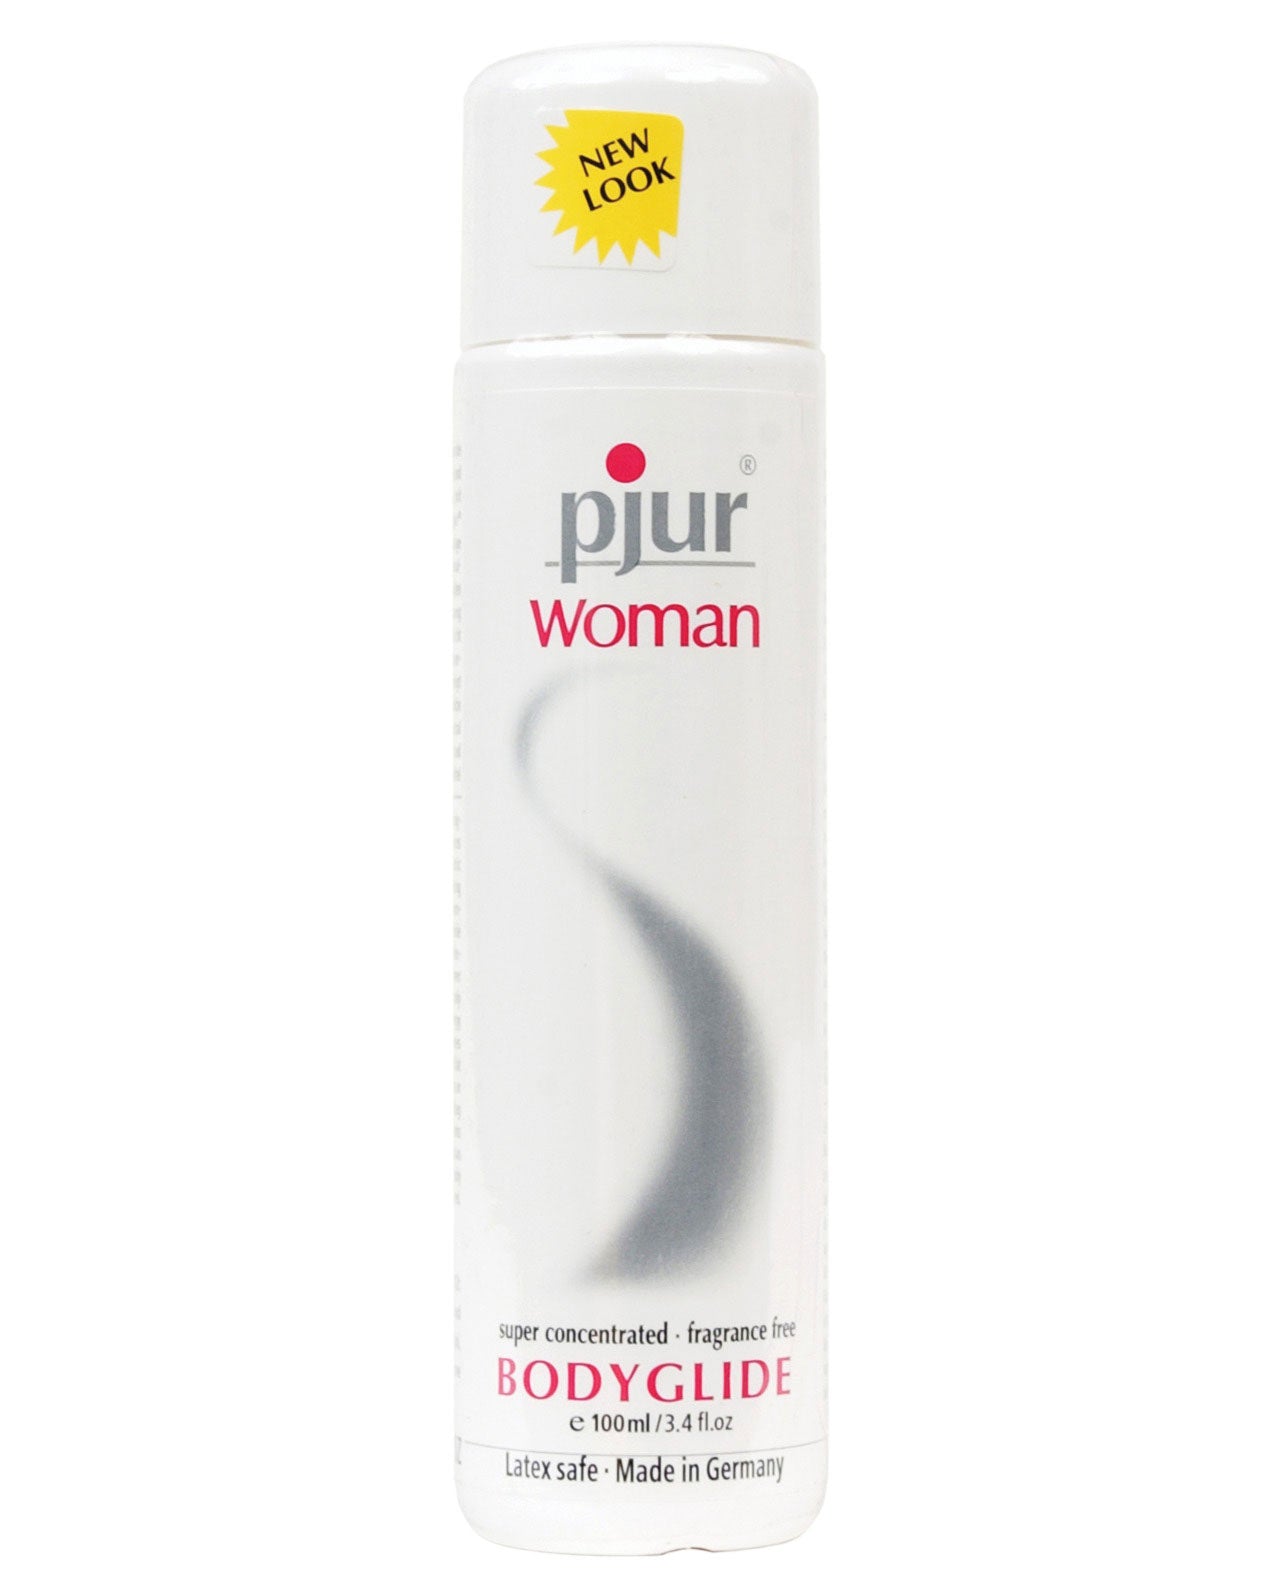 Pjur Woman Silicone Personal Lubricant - 100 ml Bottle